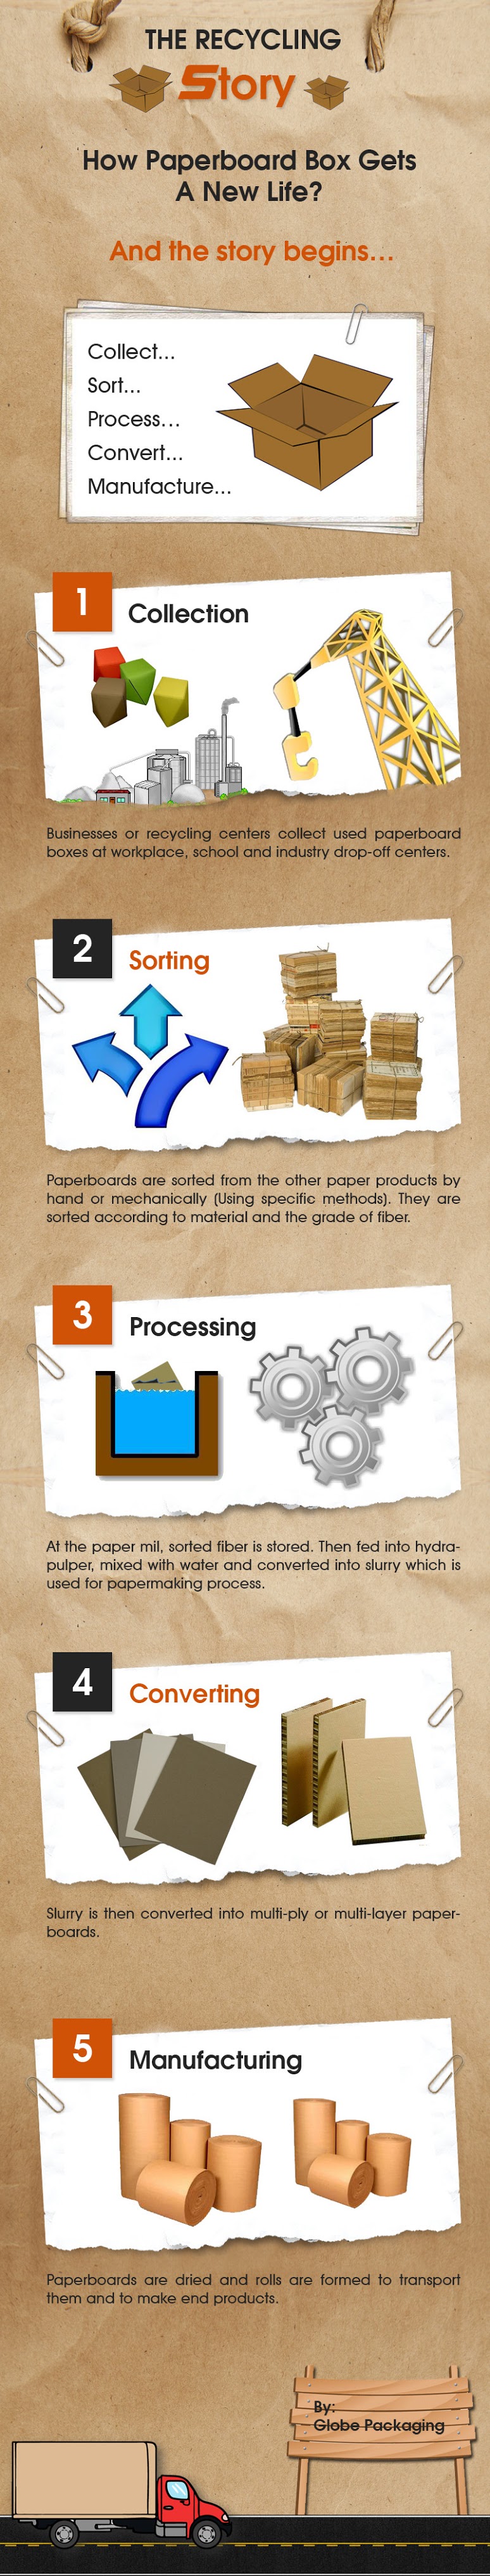 Infographic: Recycling Story of Paperboard